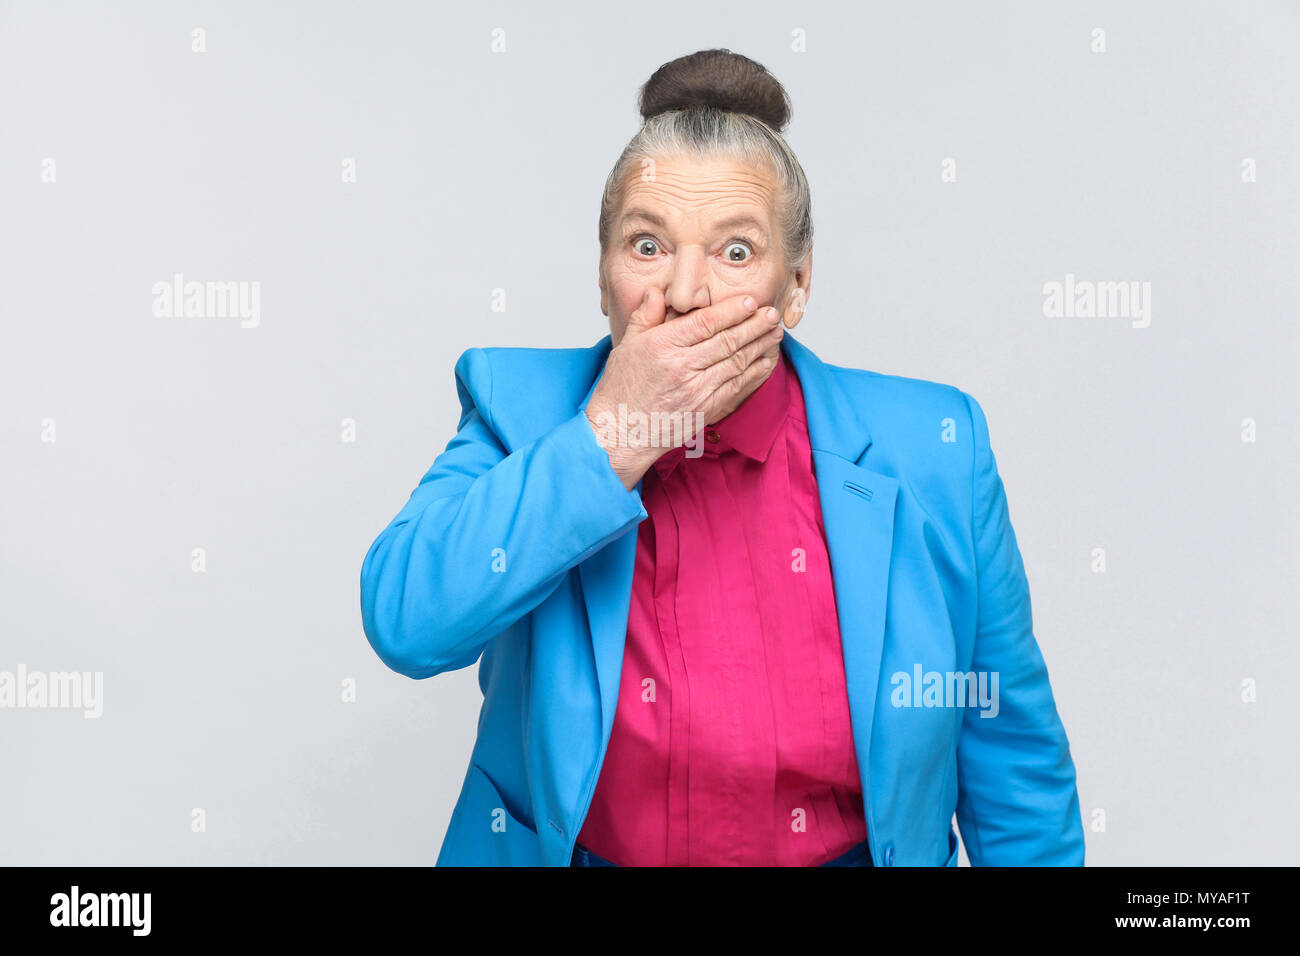 Scared aged woman closed mouth and have big eyes. Portrait of expressive grandmother with light blue suit and pink shirt standing with collected bun g Stock Photo